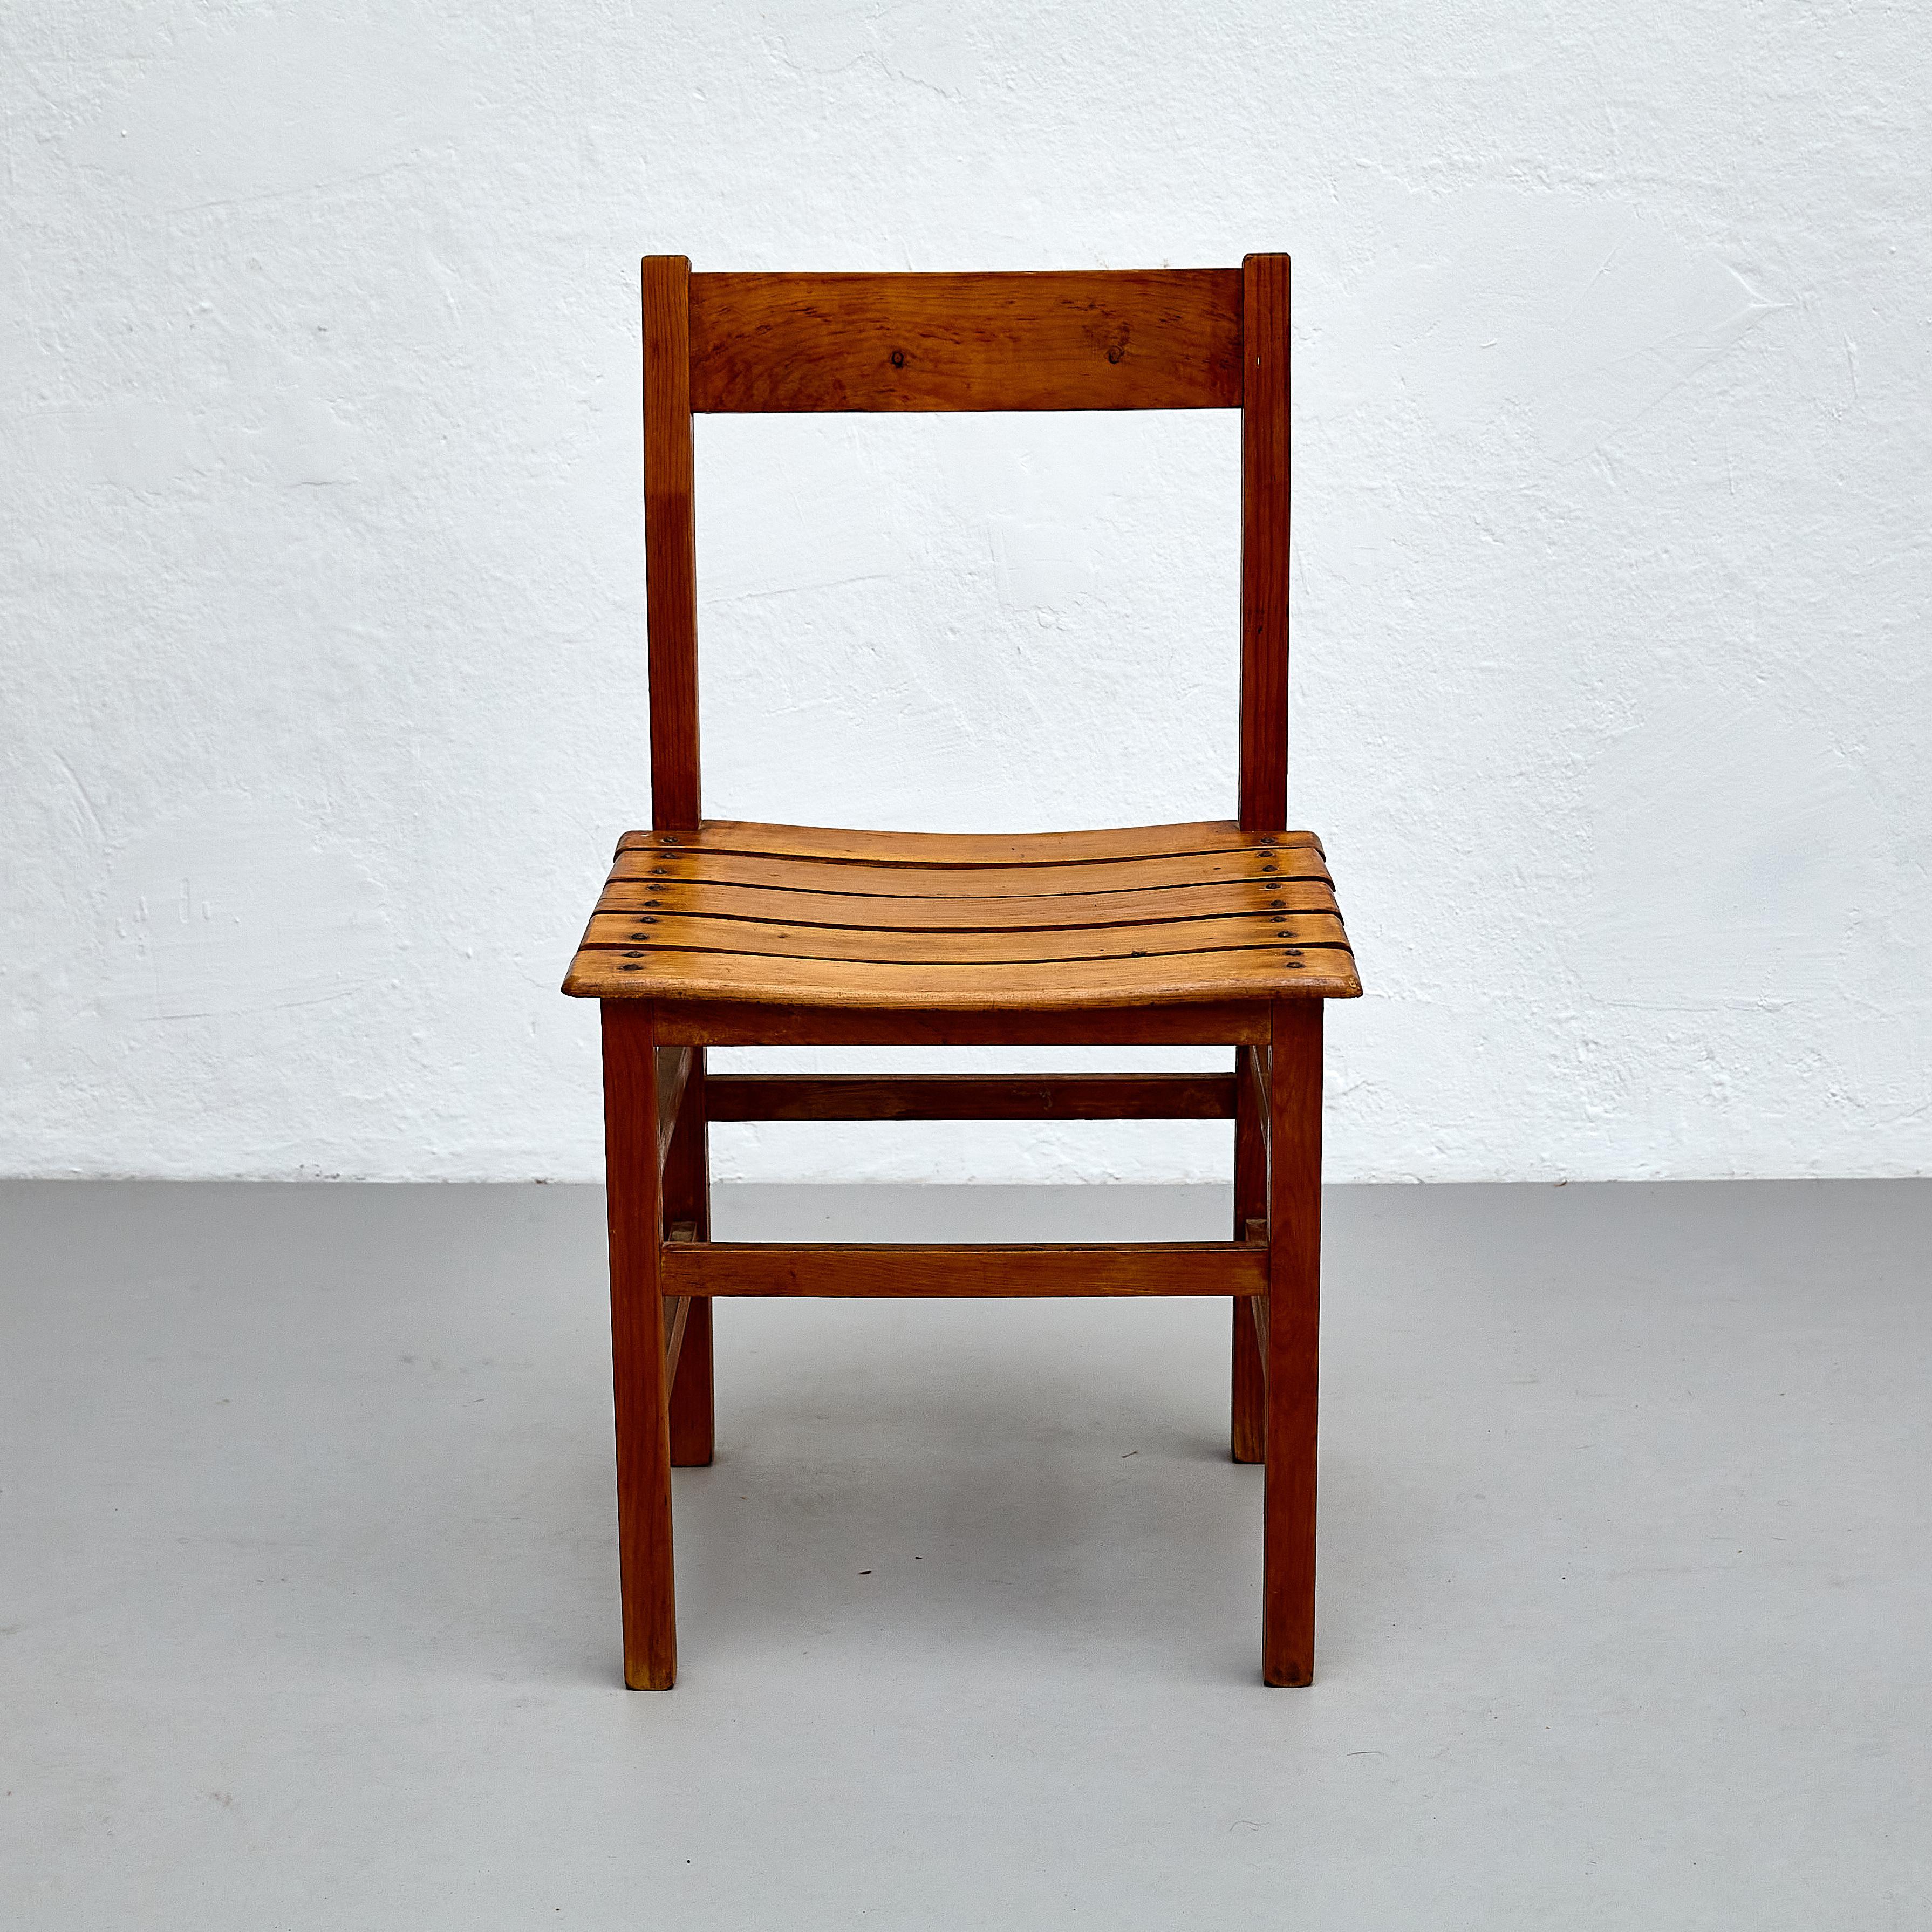 Set of Four Mid-Century Modern Rationalist Wood Chairs, Rustic Charm, circa 1960 For Sale 13